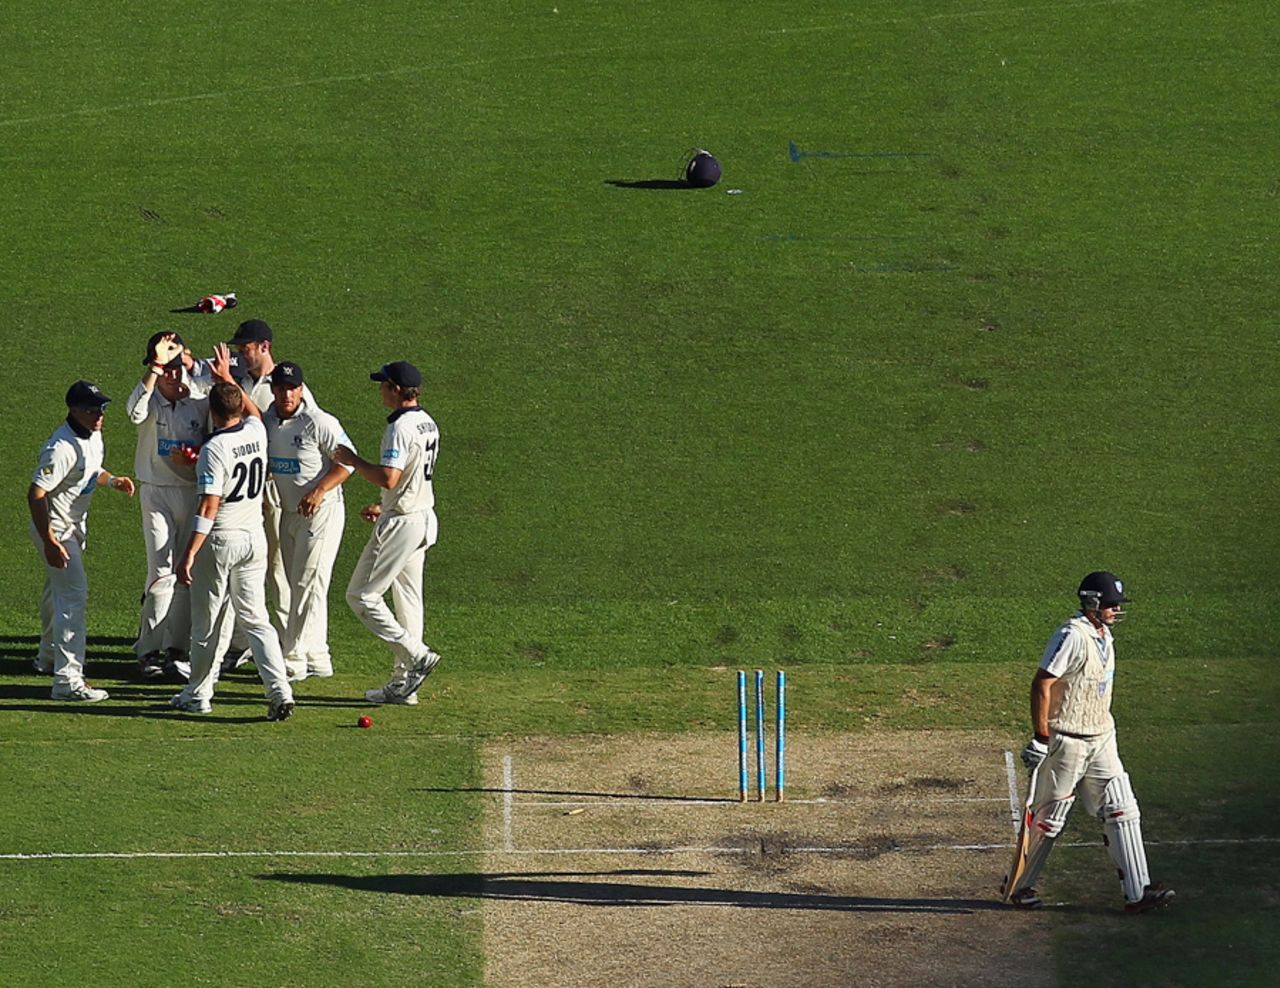 Victoria celebrate the wicket of Ben Rohrer, Victoria v New South Wales, Sheffield Shield, Melbourne, 2nd day, March 9, 2012